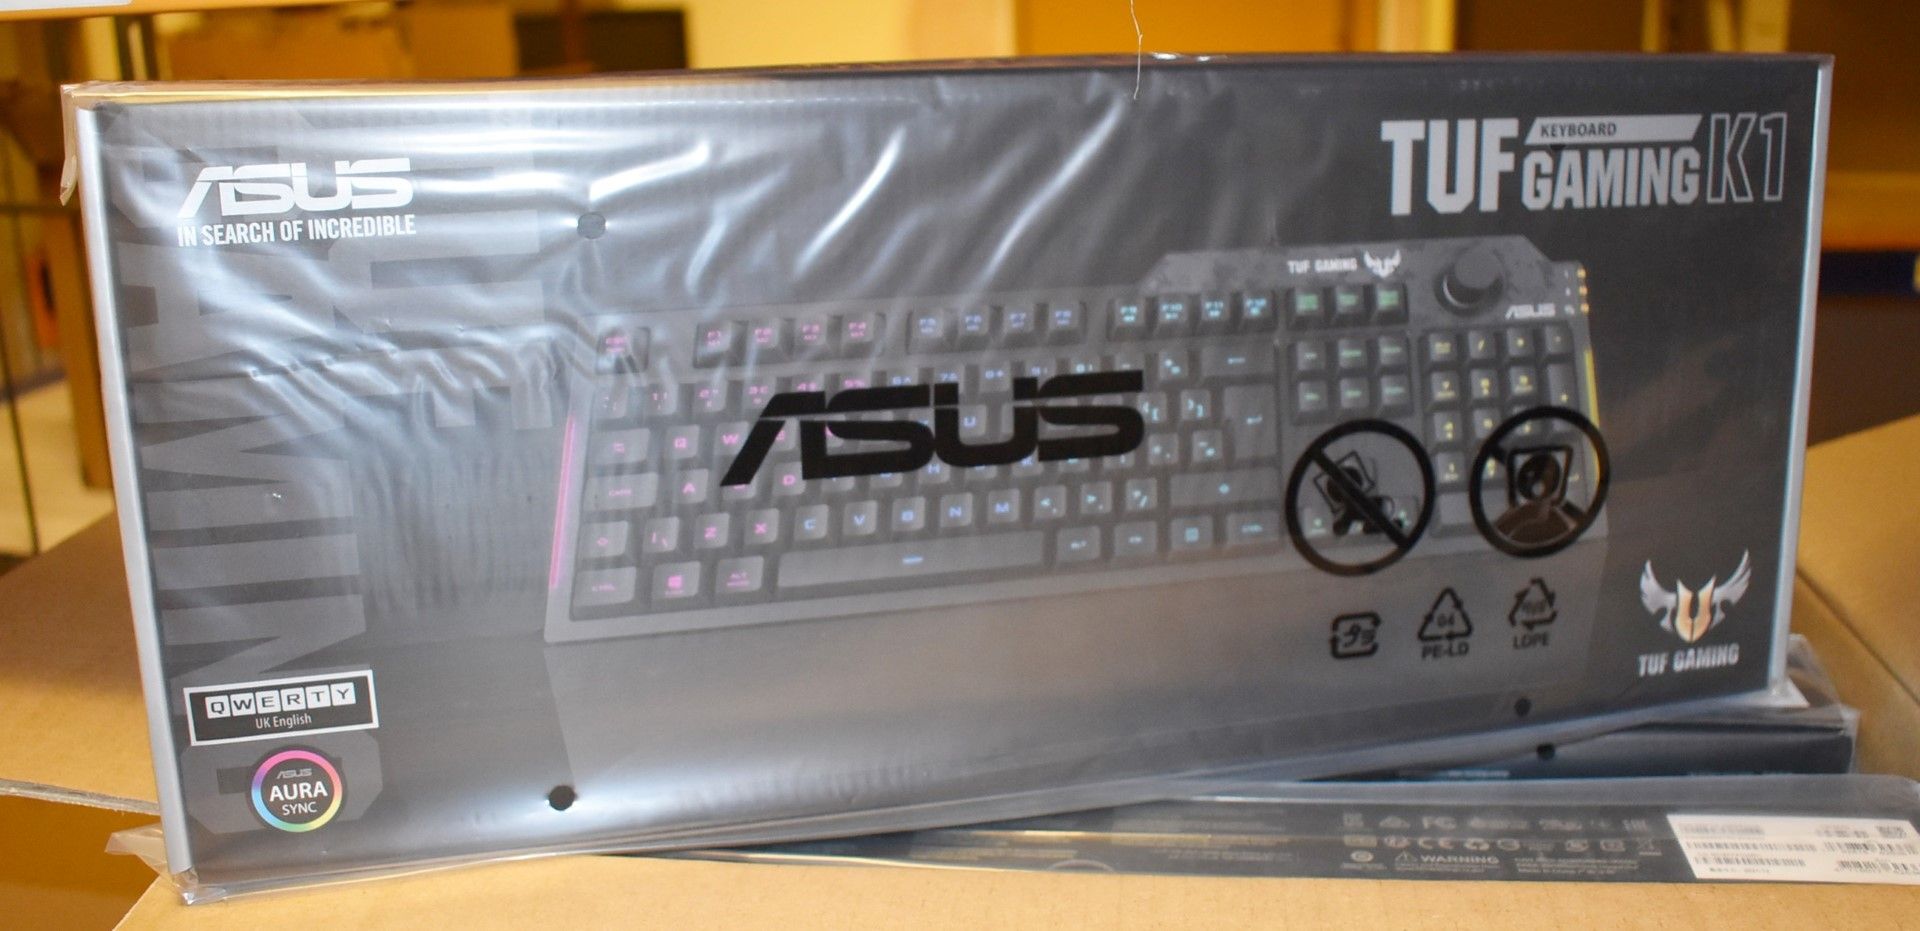 1 x Asus TUF K1 RGB Gaming Keyboard - Brand New and Boxed - Features Volume Control, Side Light - Image 8 of 8